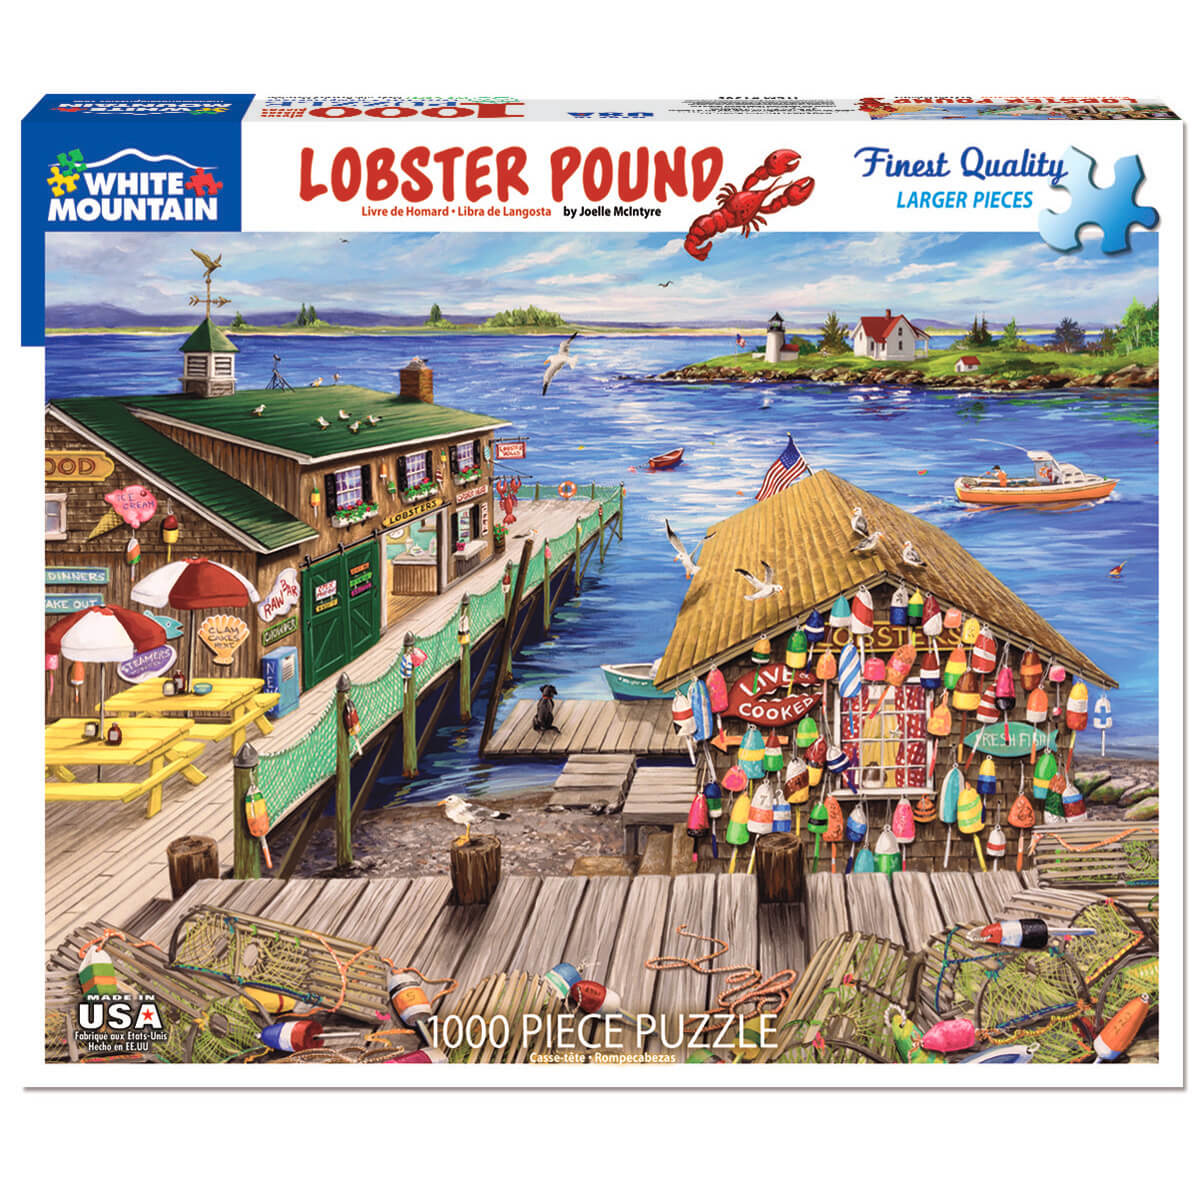 White Mountain Puzzles Lobster Pound 1000 Piece Jigsaw Puzzle